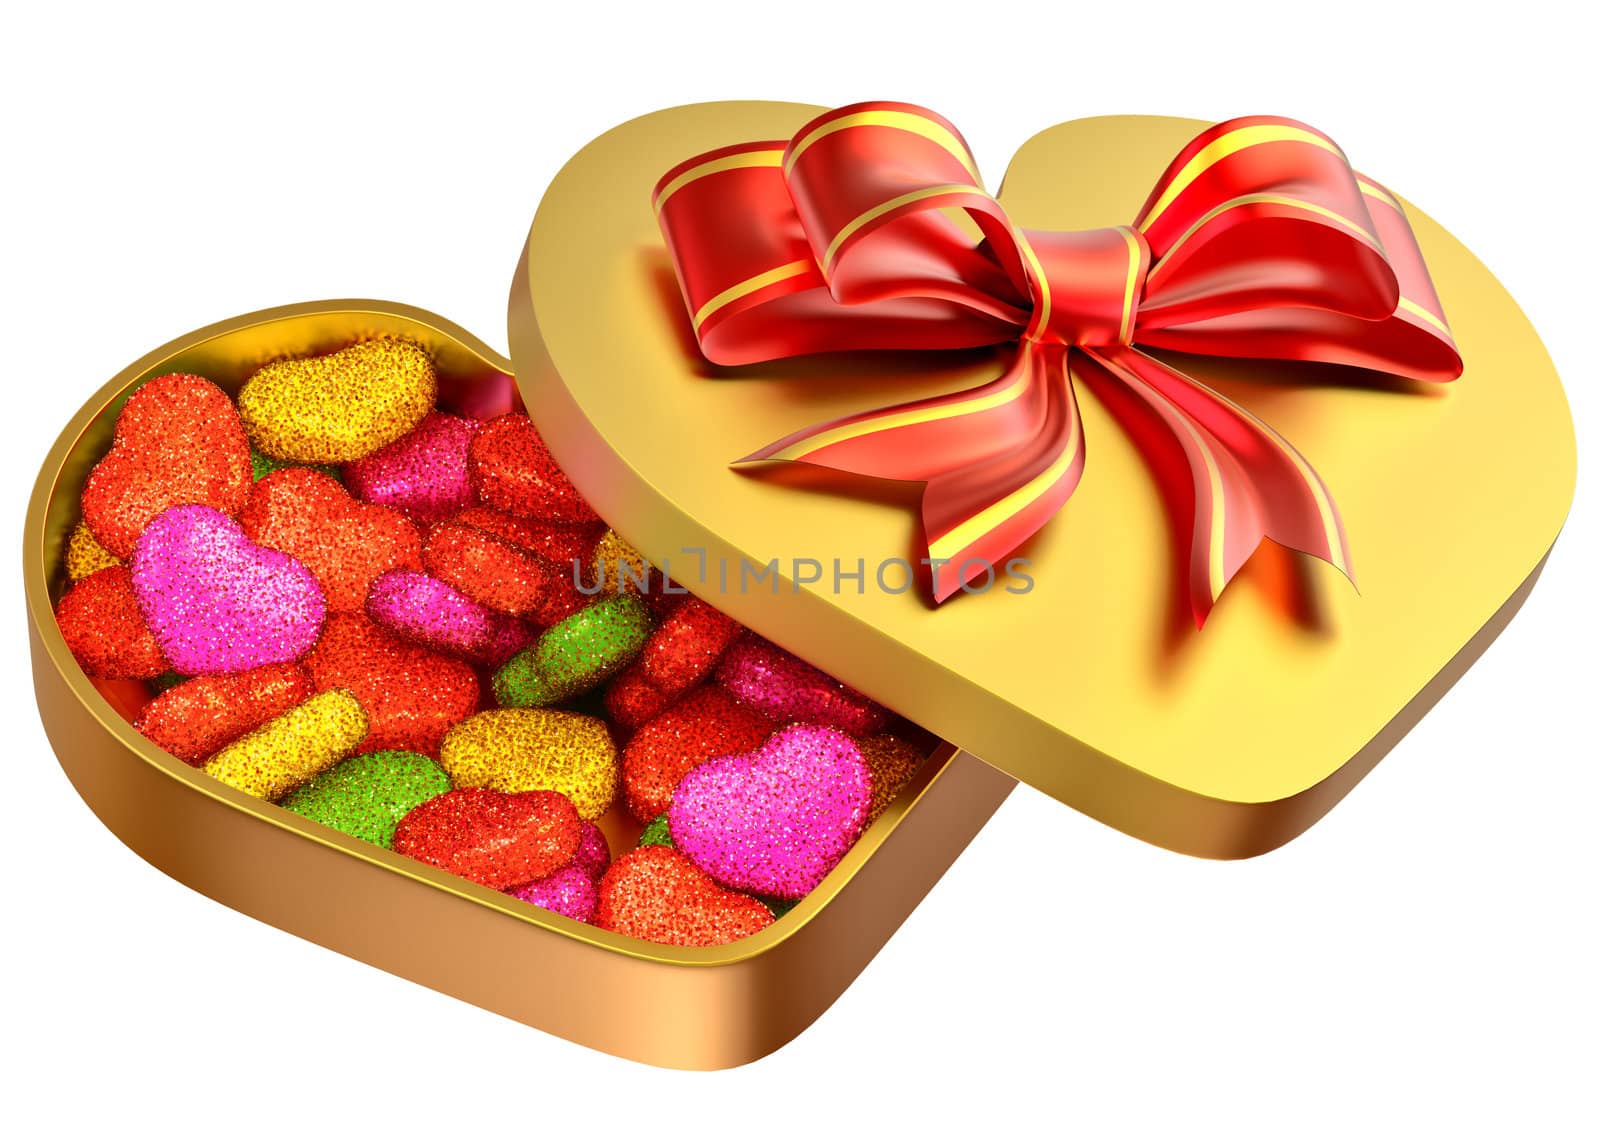 candy in a box as a gift for Valentine's Day by merzavka